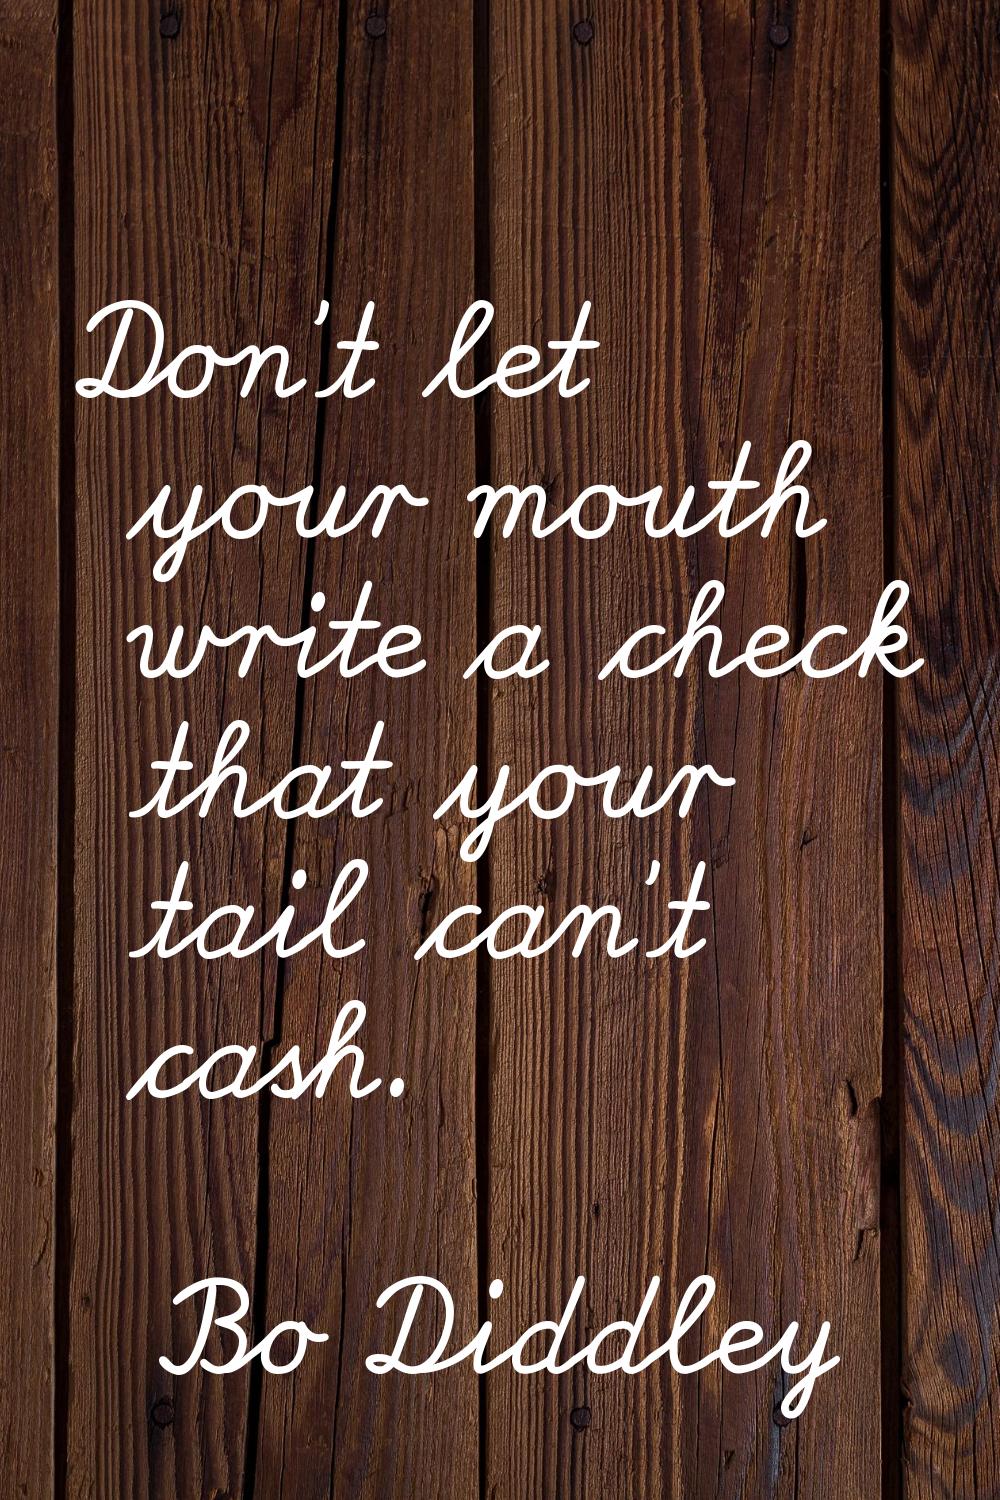 Don't let your mouth write a check that your tail can't cash.